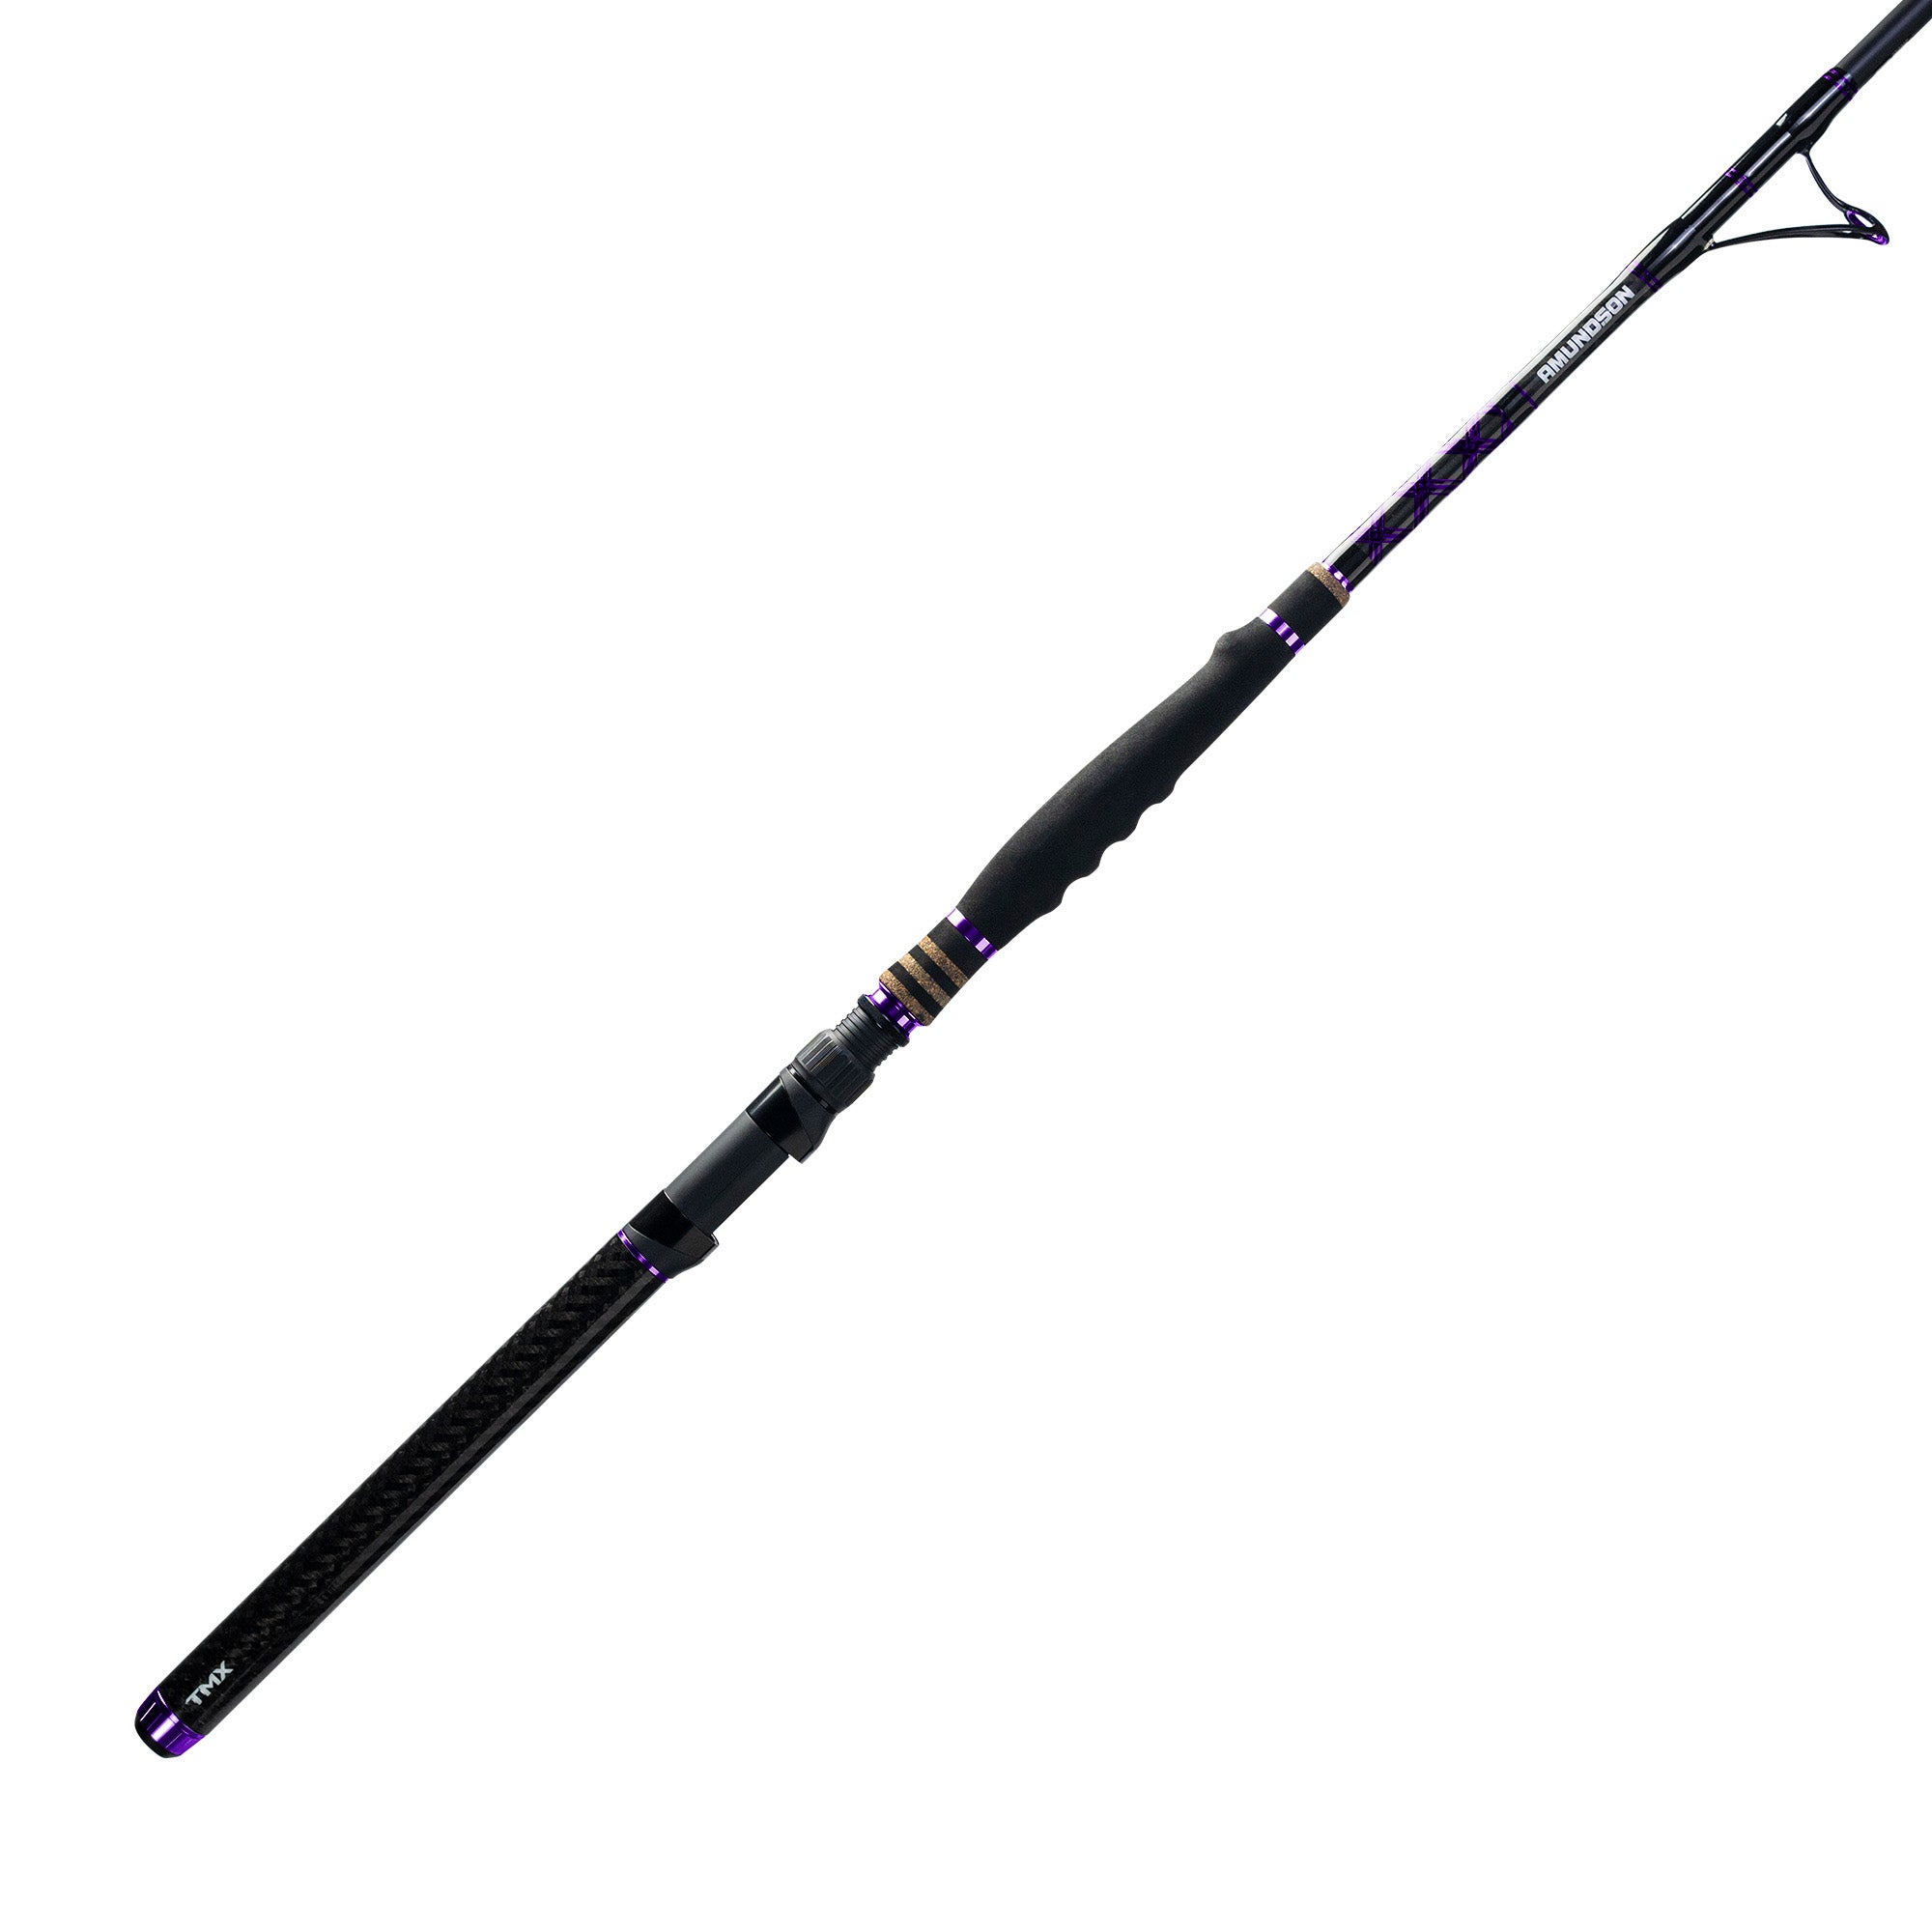 Trout FRD Ejec tion Rod Micro player 1.5 Sections Travel Spinning